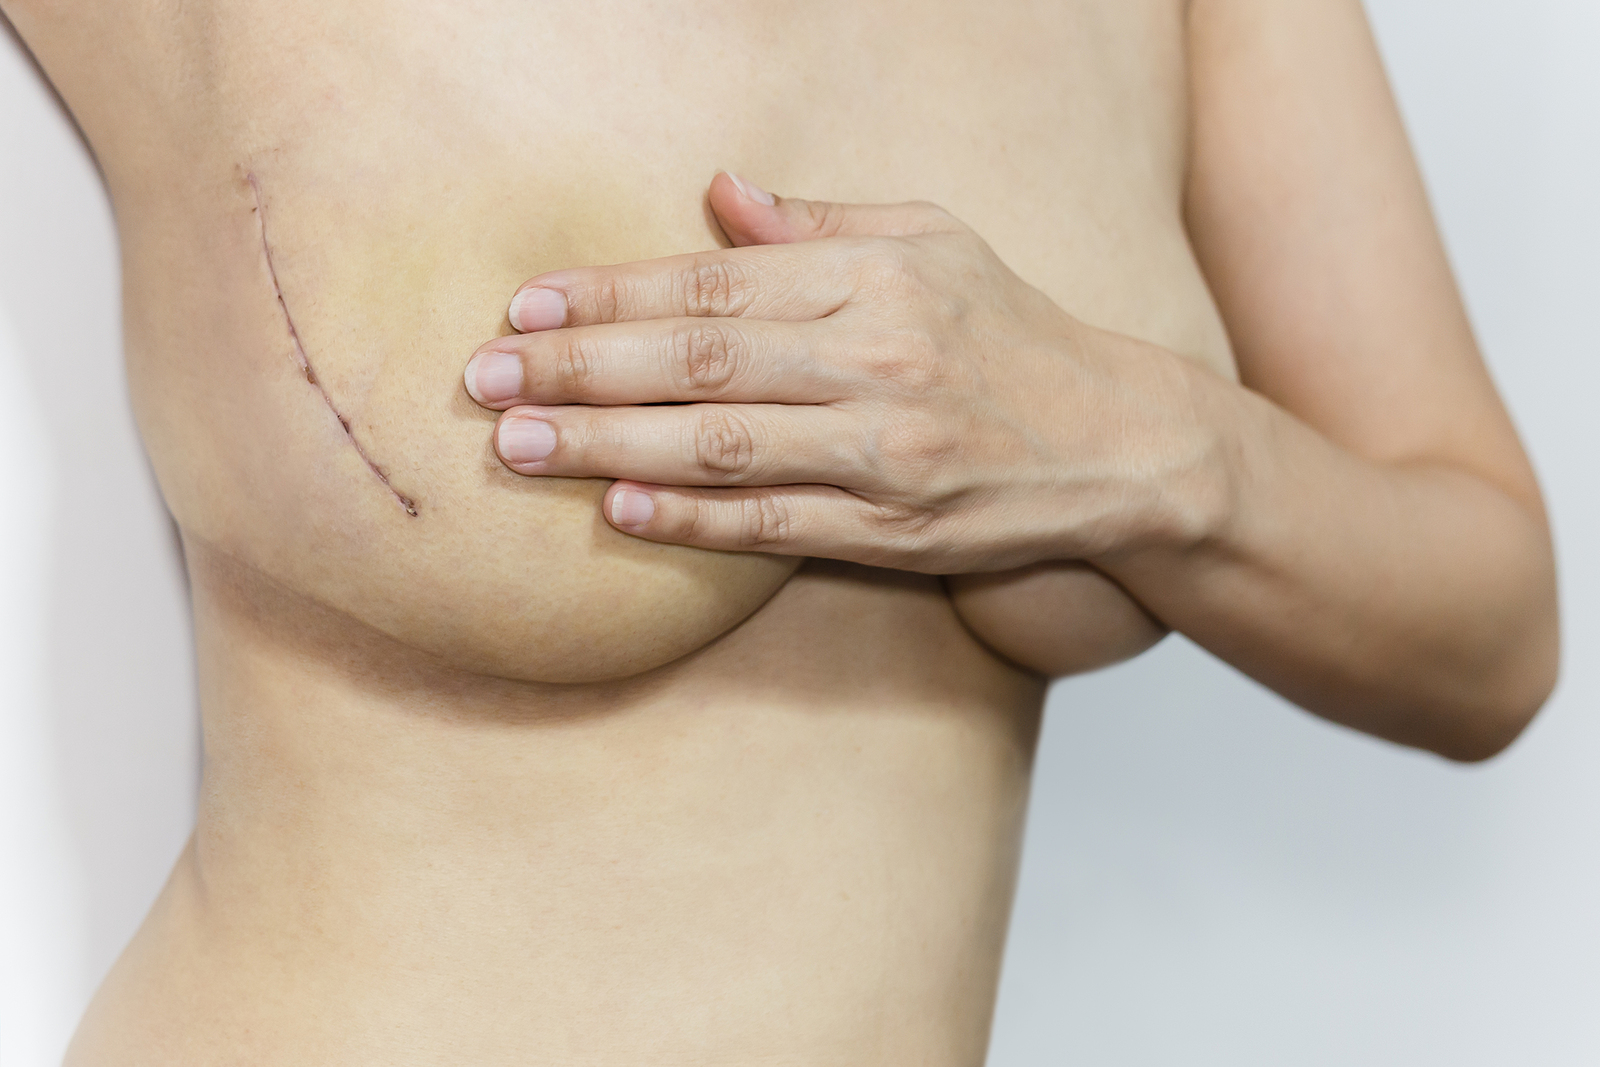 breast implant removal scars | boob scars after surgery